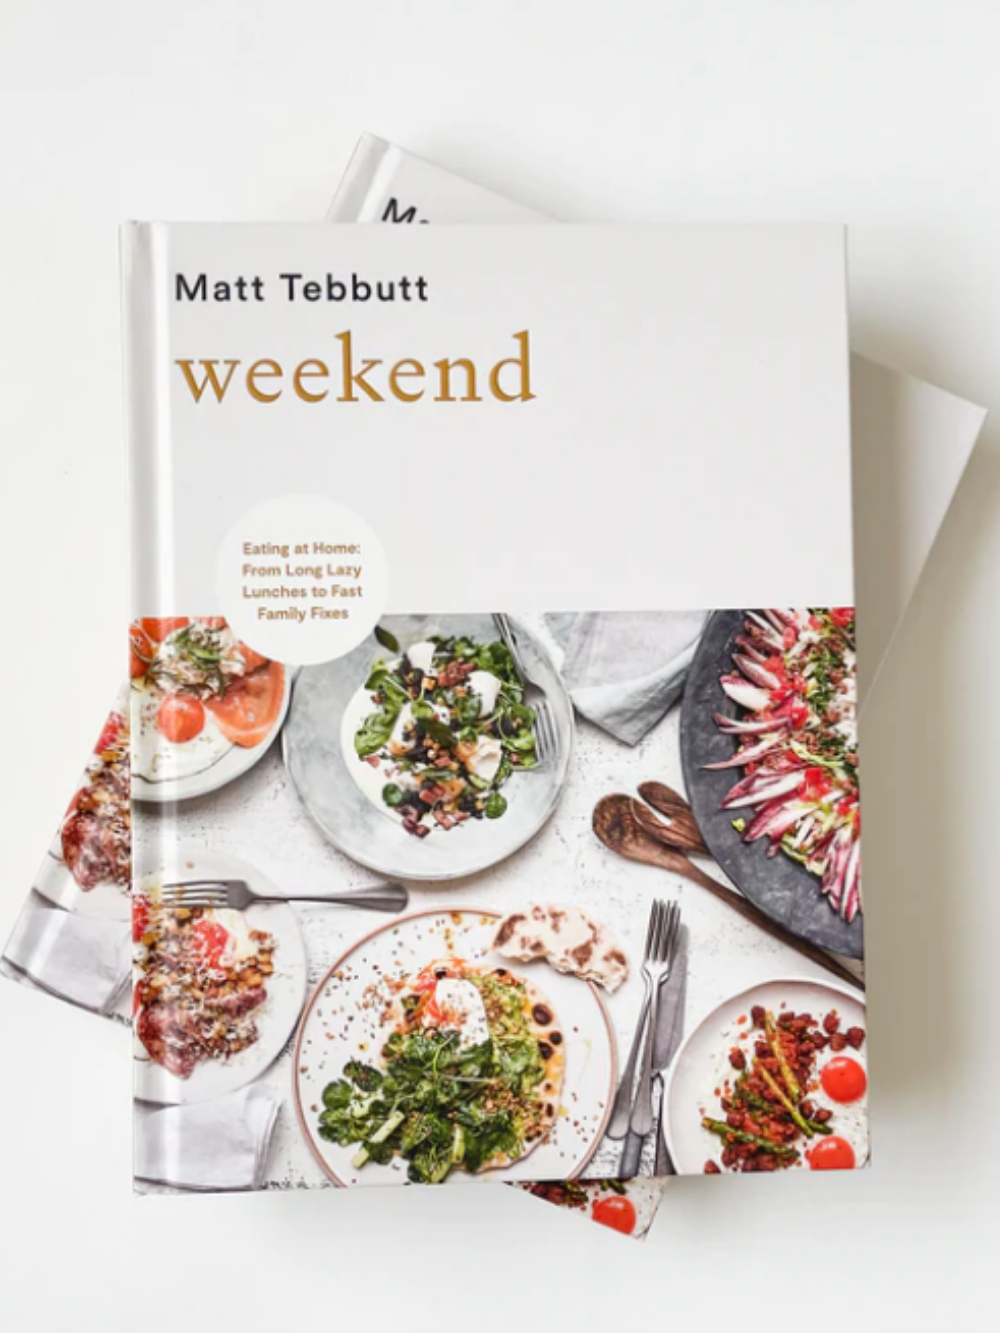 100 recipes and menu combinations to make the weekend special. Written by Matt Tebbutt